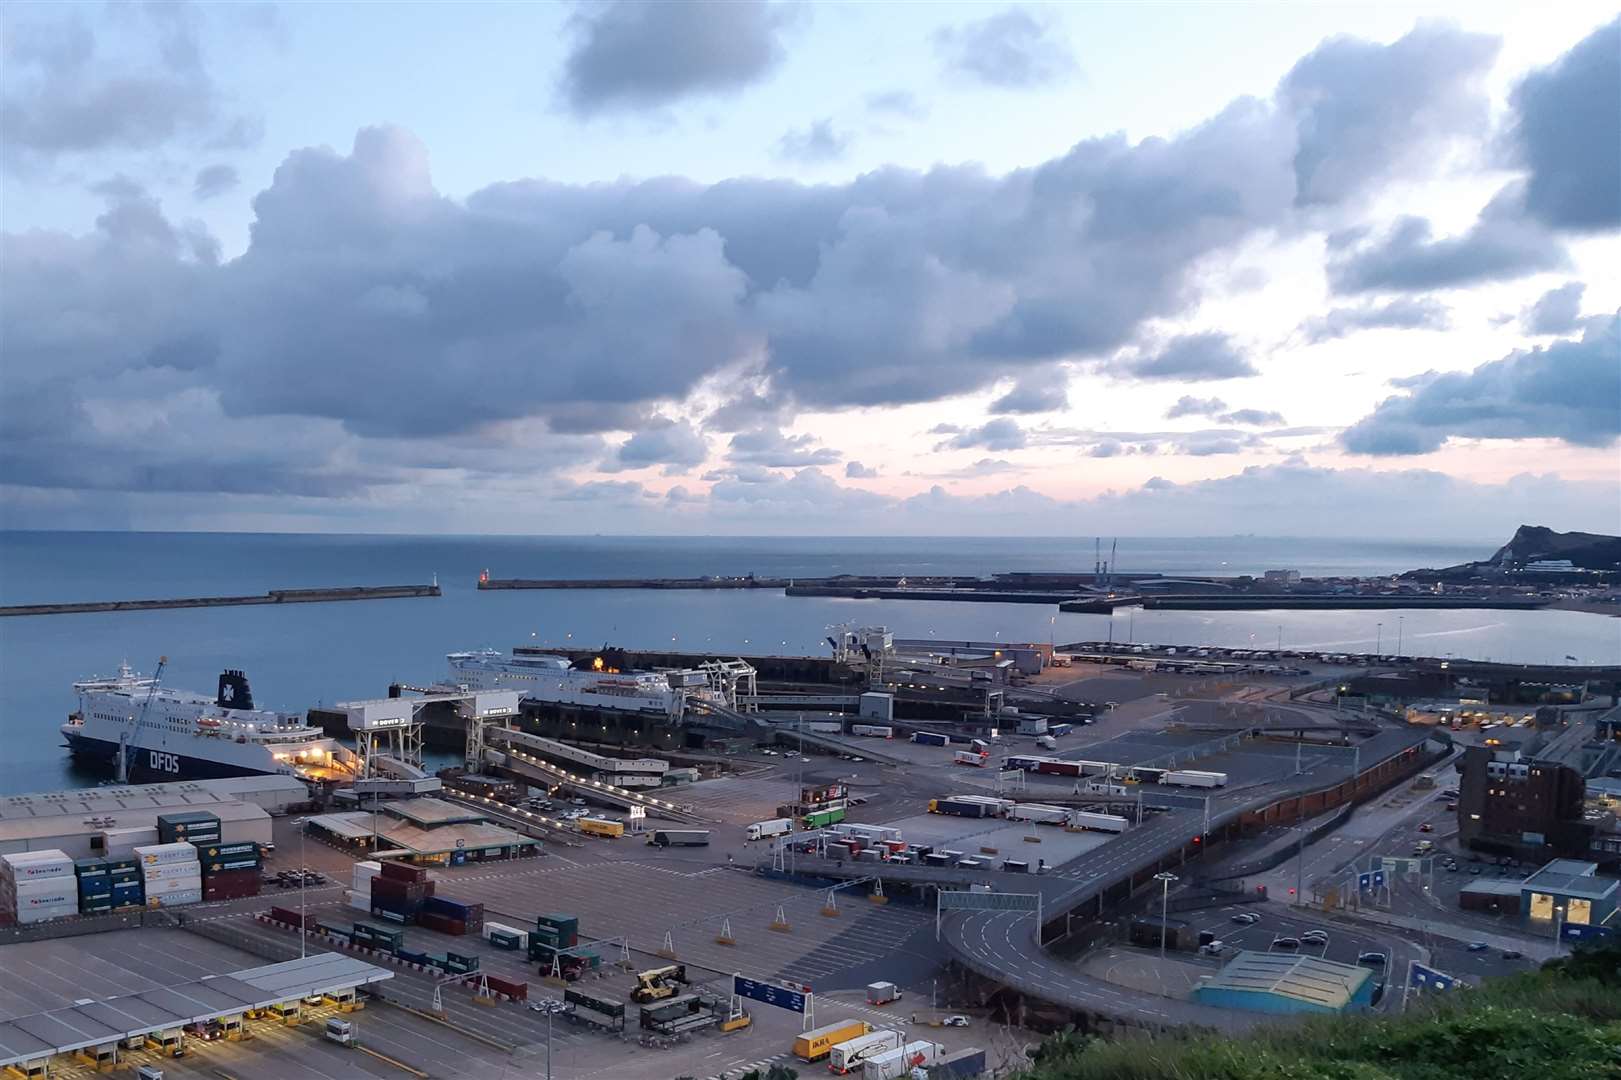 The Port of Dover includes Dover Eastern Docks, the Western Docks and the Cruise Terminal